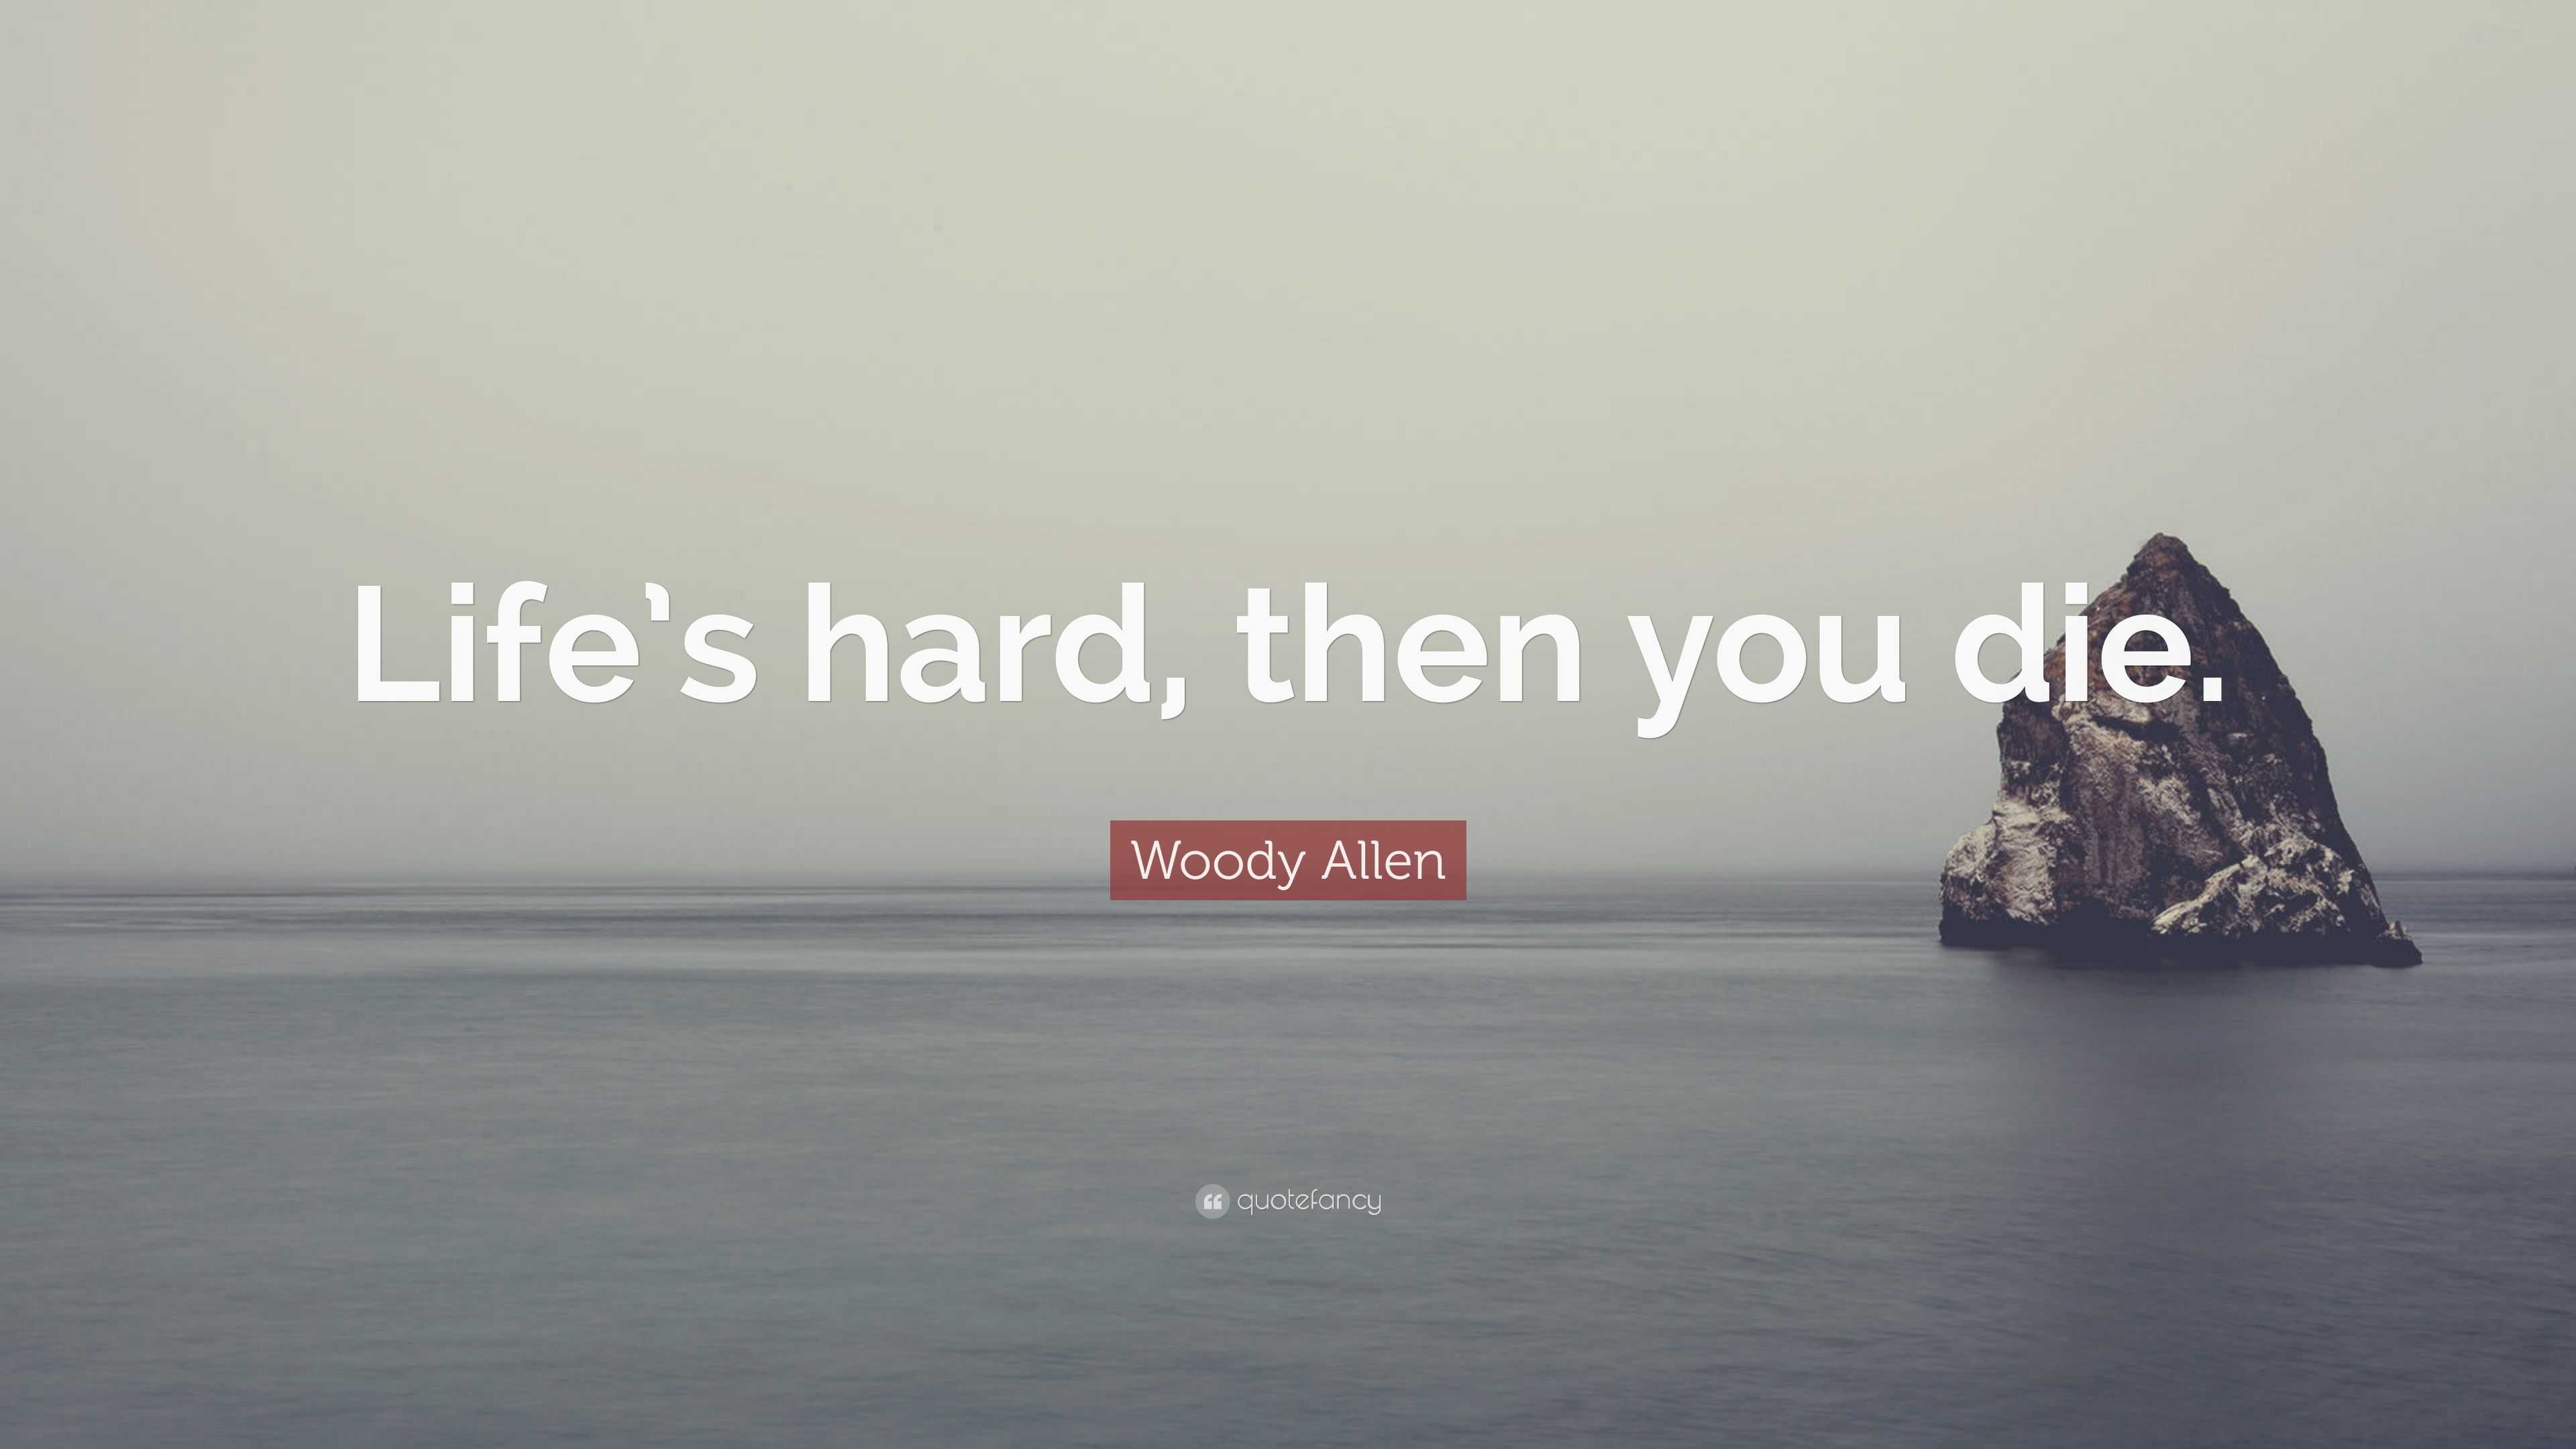 Woody Allen Quote “Life s hard then you ”